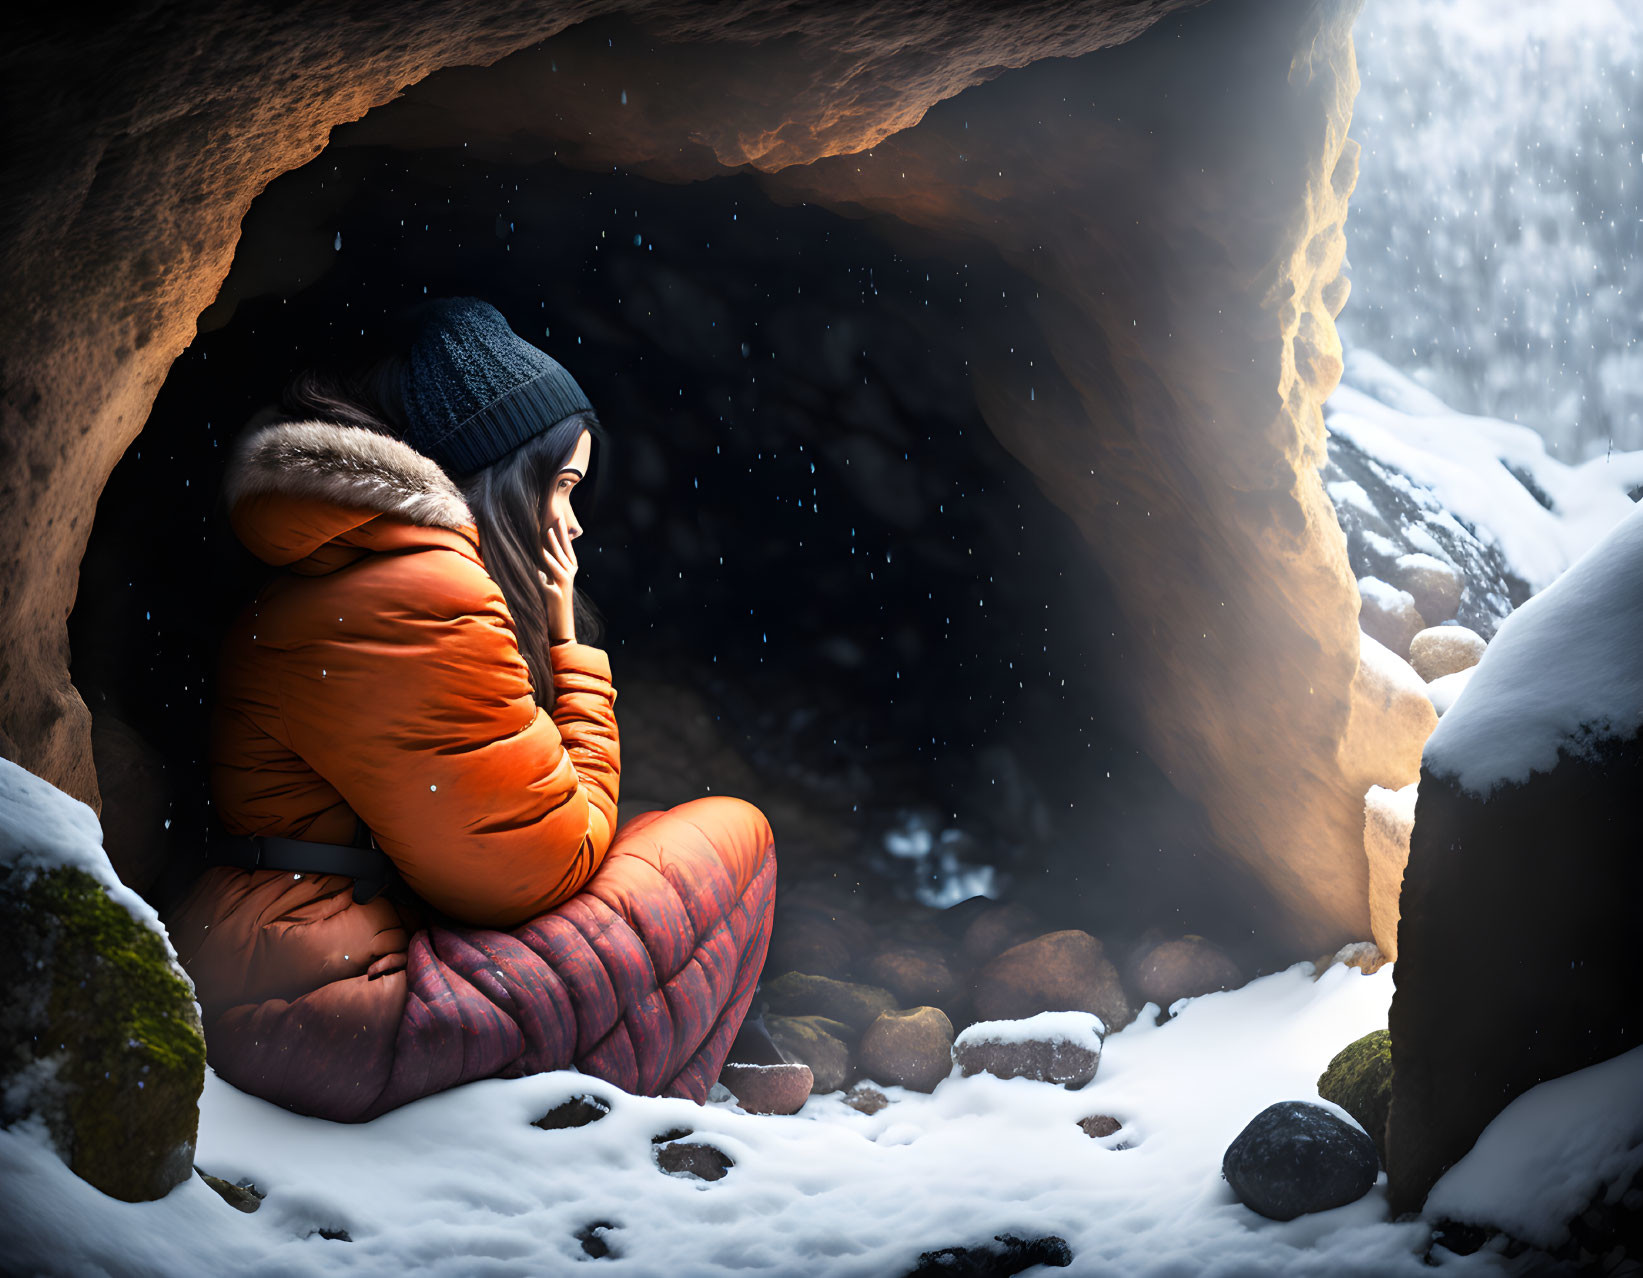 Person in Orange Jacket Contemplating in Snowy Cave